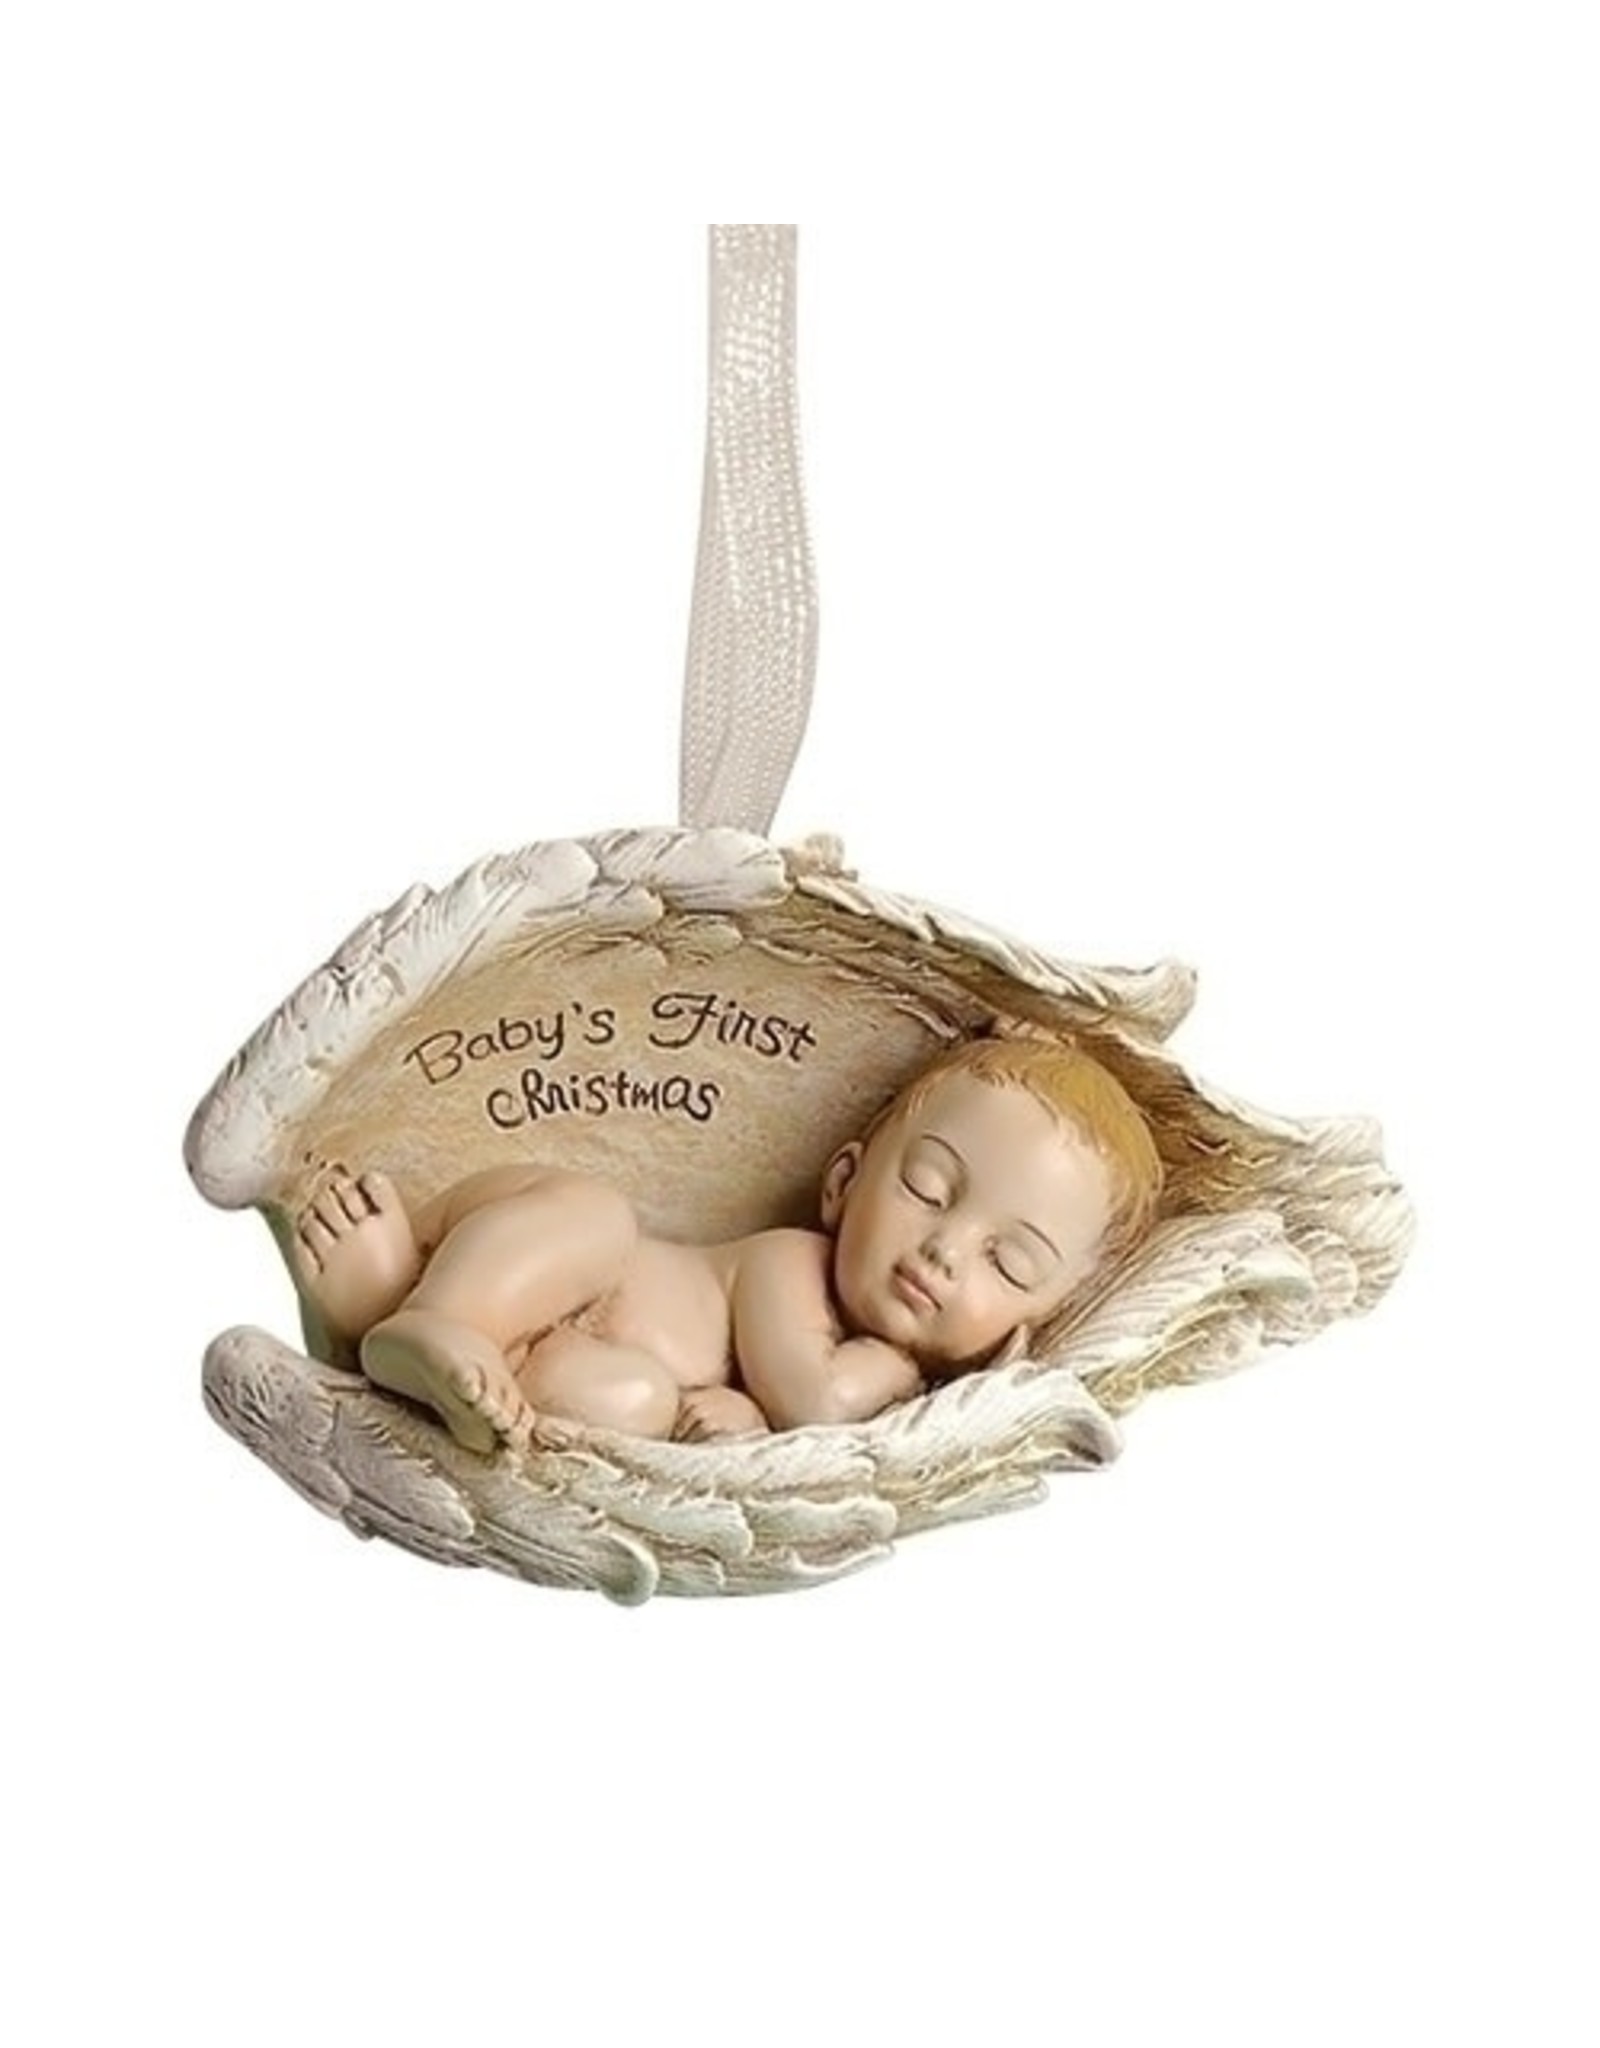 Roman Ornament - Baby's First Christmas